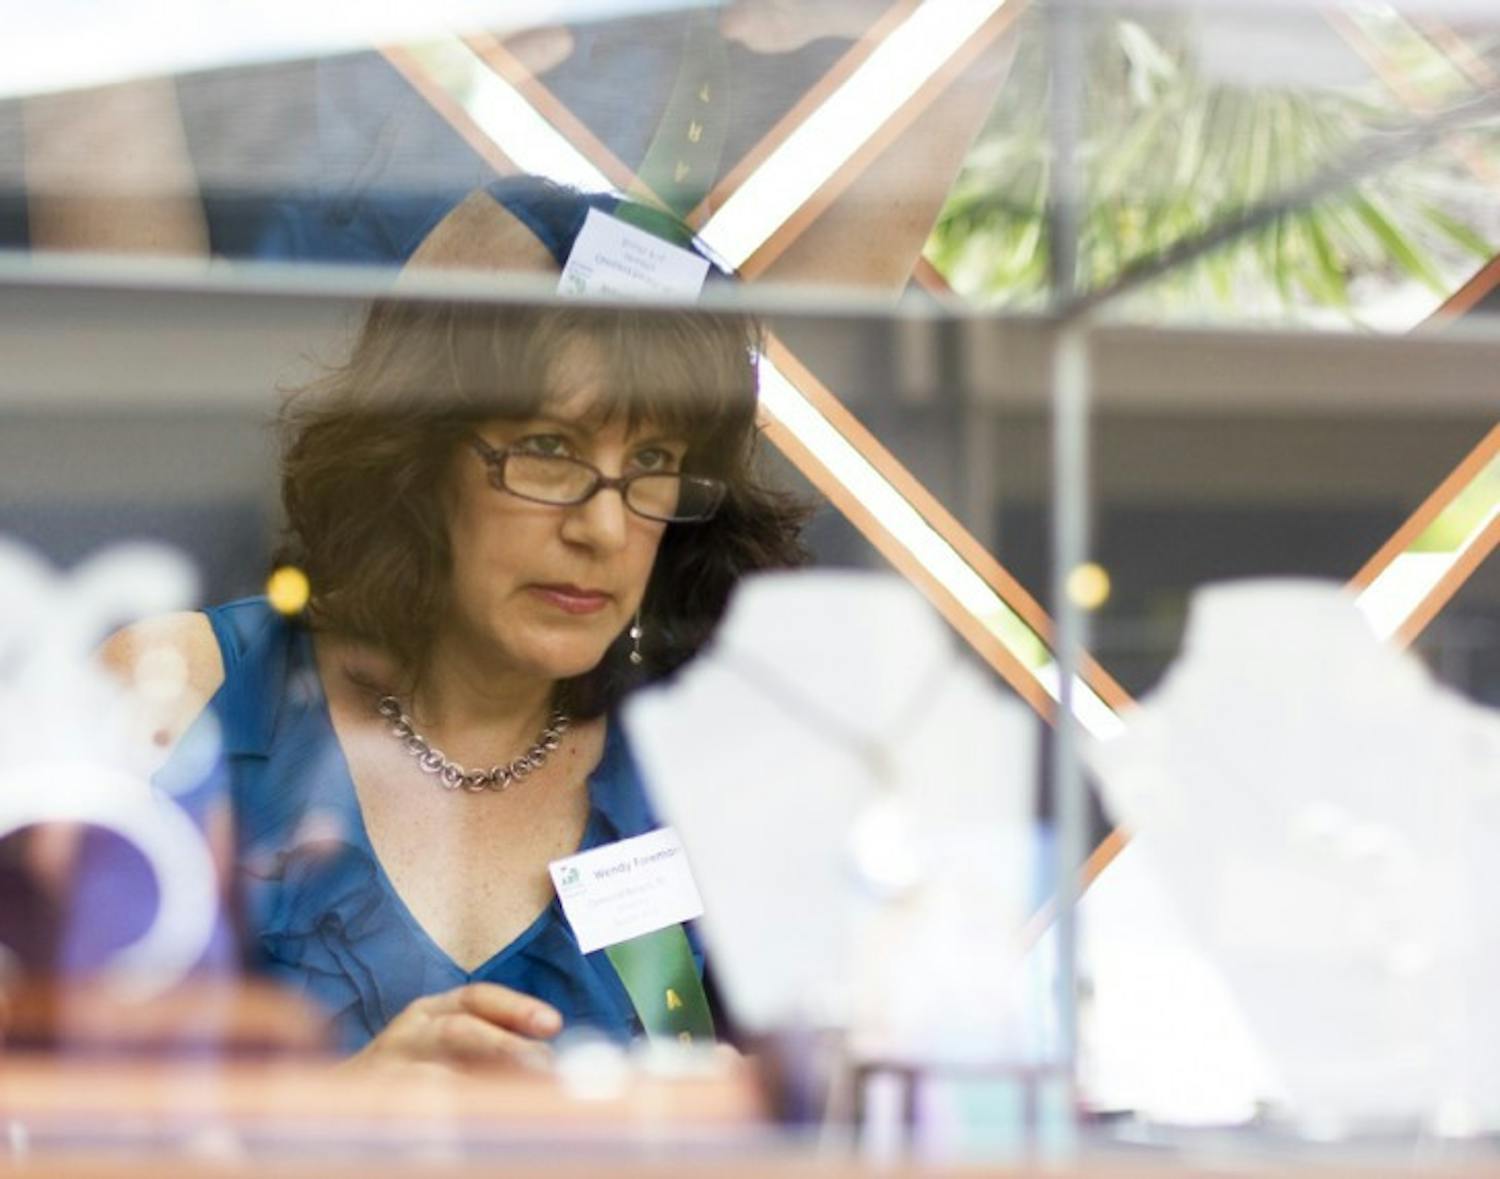 Wendy Foreman, a 51-year-old jeweler from Ormond Beach, Fla., peers over her display at the Gainesville Fine Arts Association's 28th annual GFAA Art Festival at Thornebrook over the weekend at 2441 NW 43rd Street.